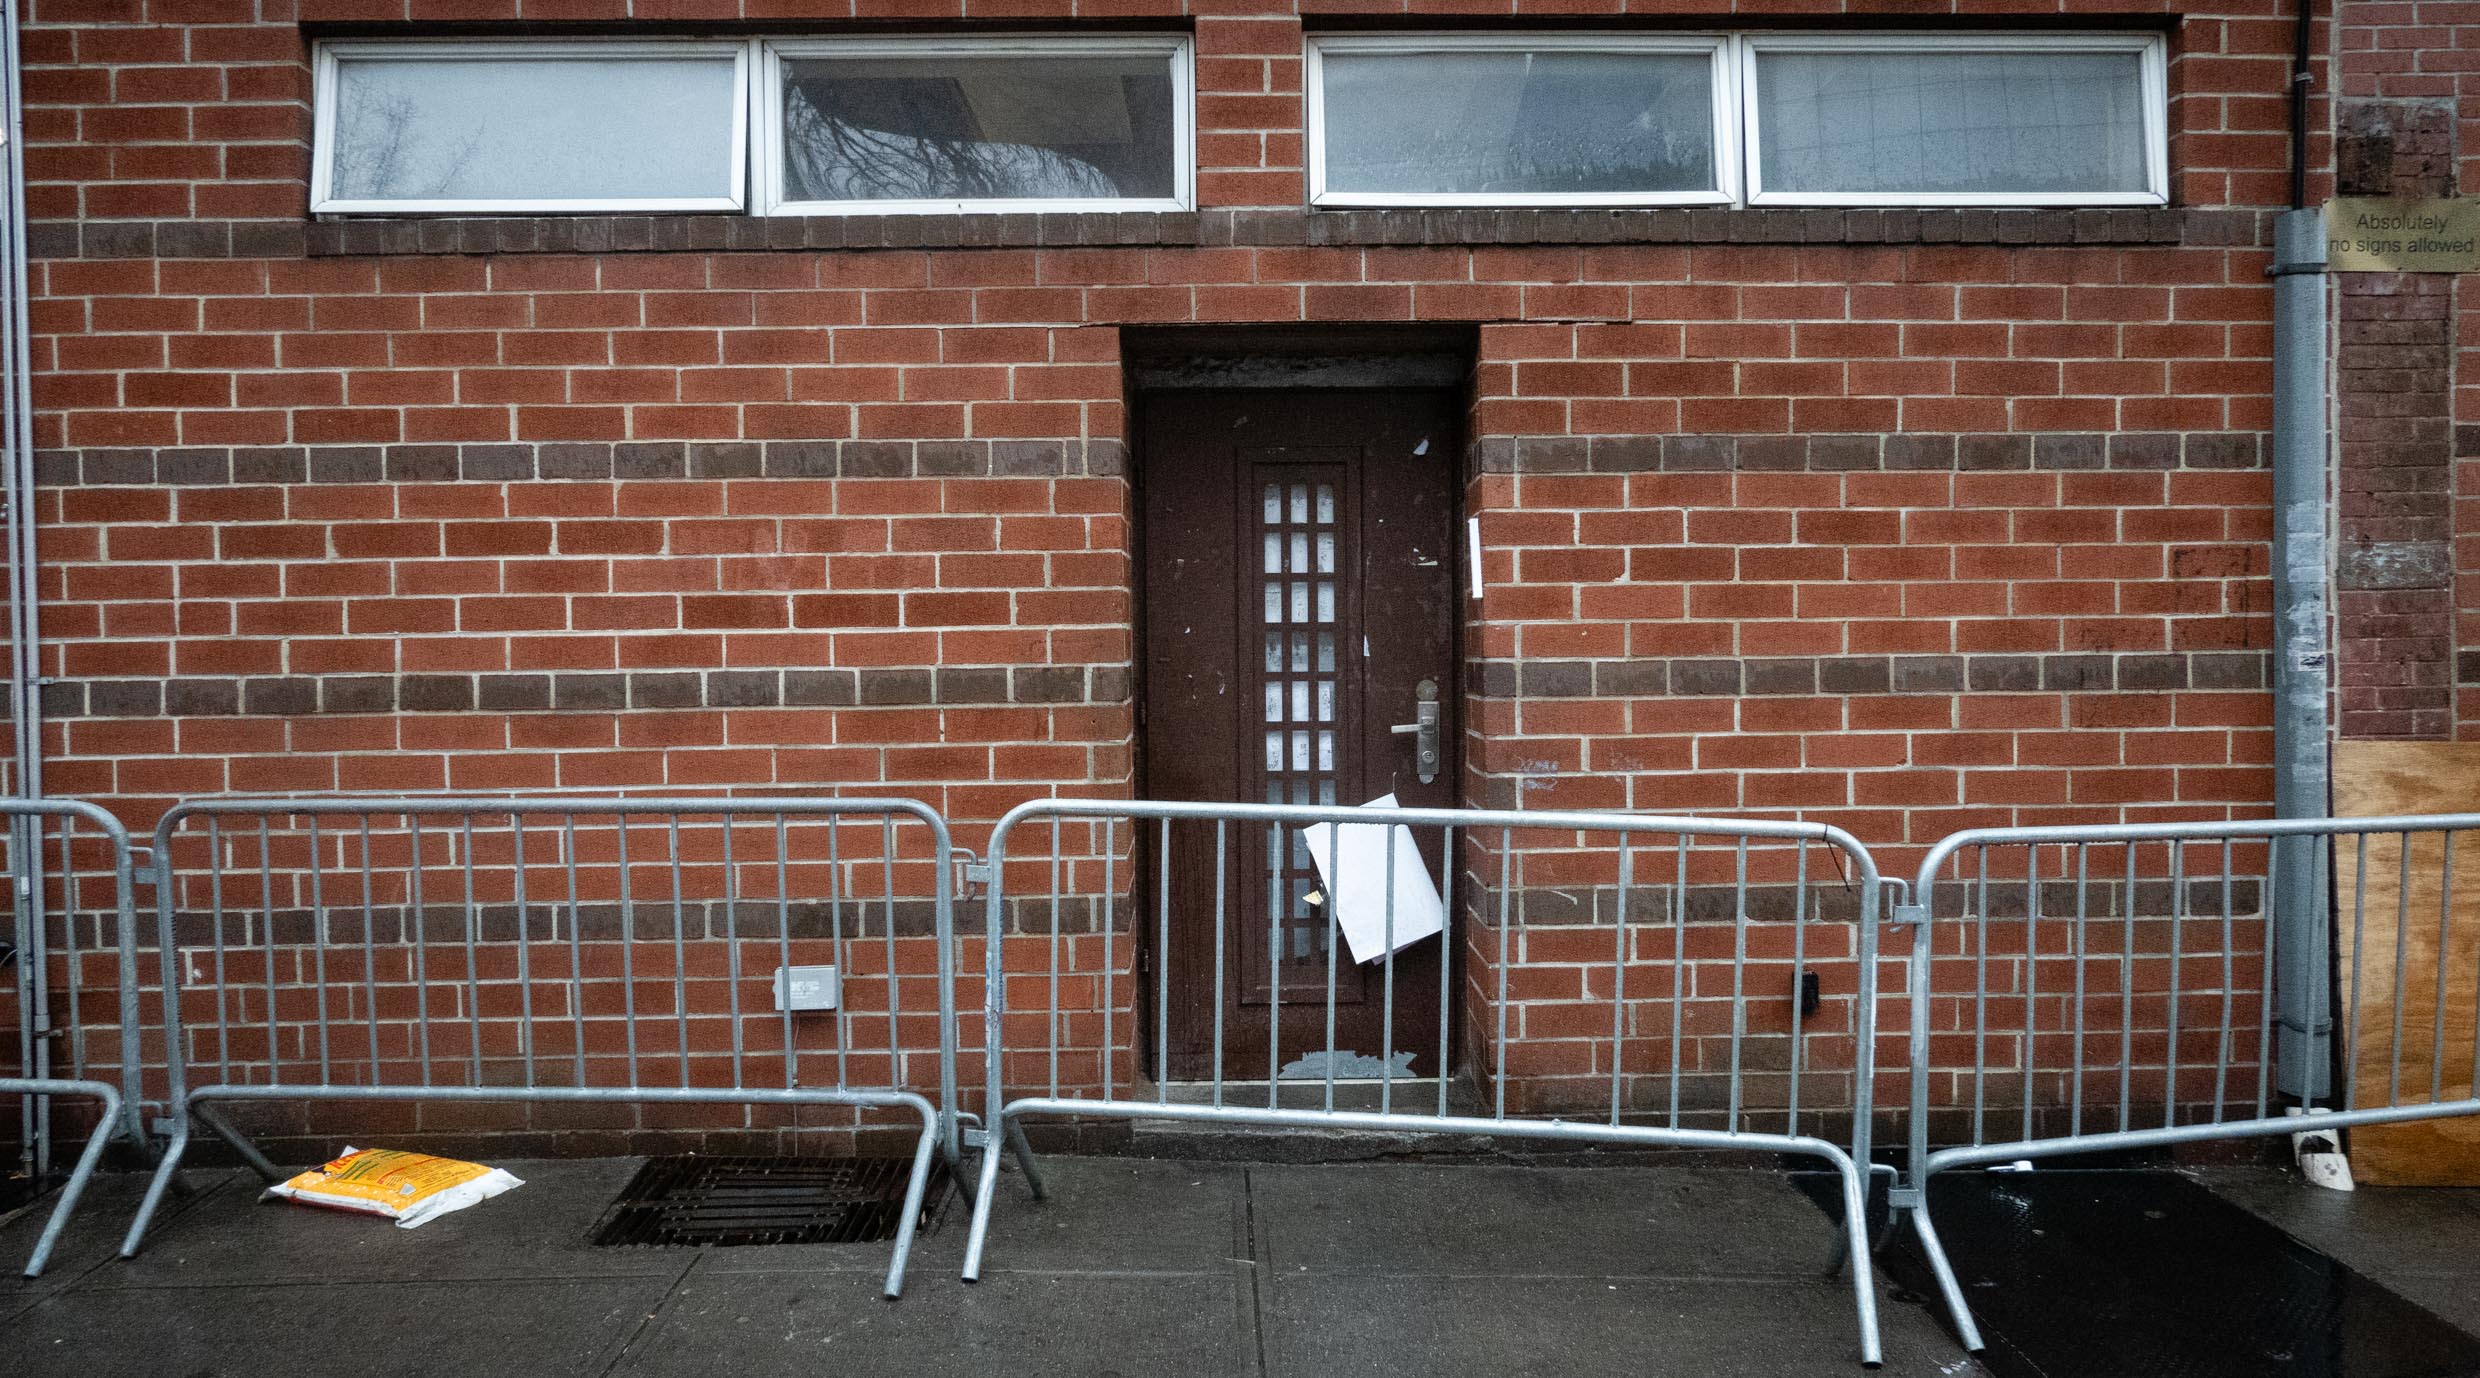 The entrance to a building adjacent to Chabad headquarters that was used for unauthorized excavations, Jan. 9, 2024. A man was seen fleeing from the metal grating to the left of the door during the incident. The grating has since been patched up. (Luke Tress)